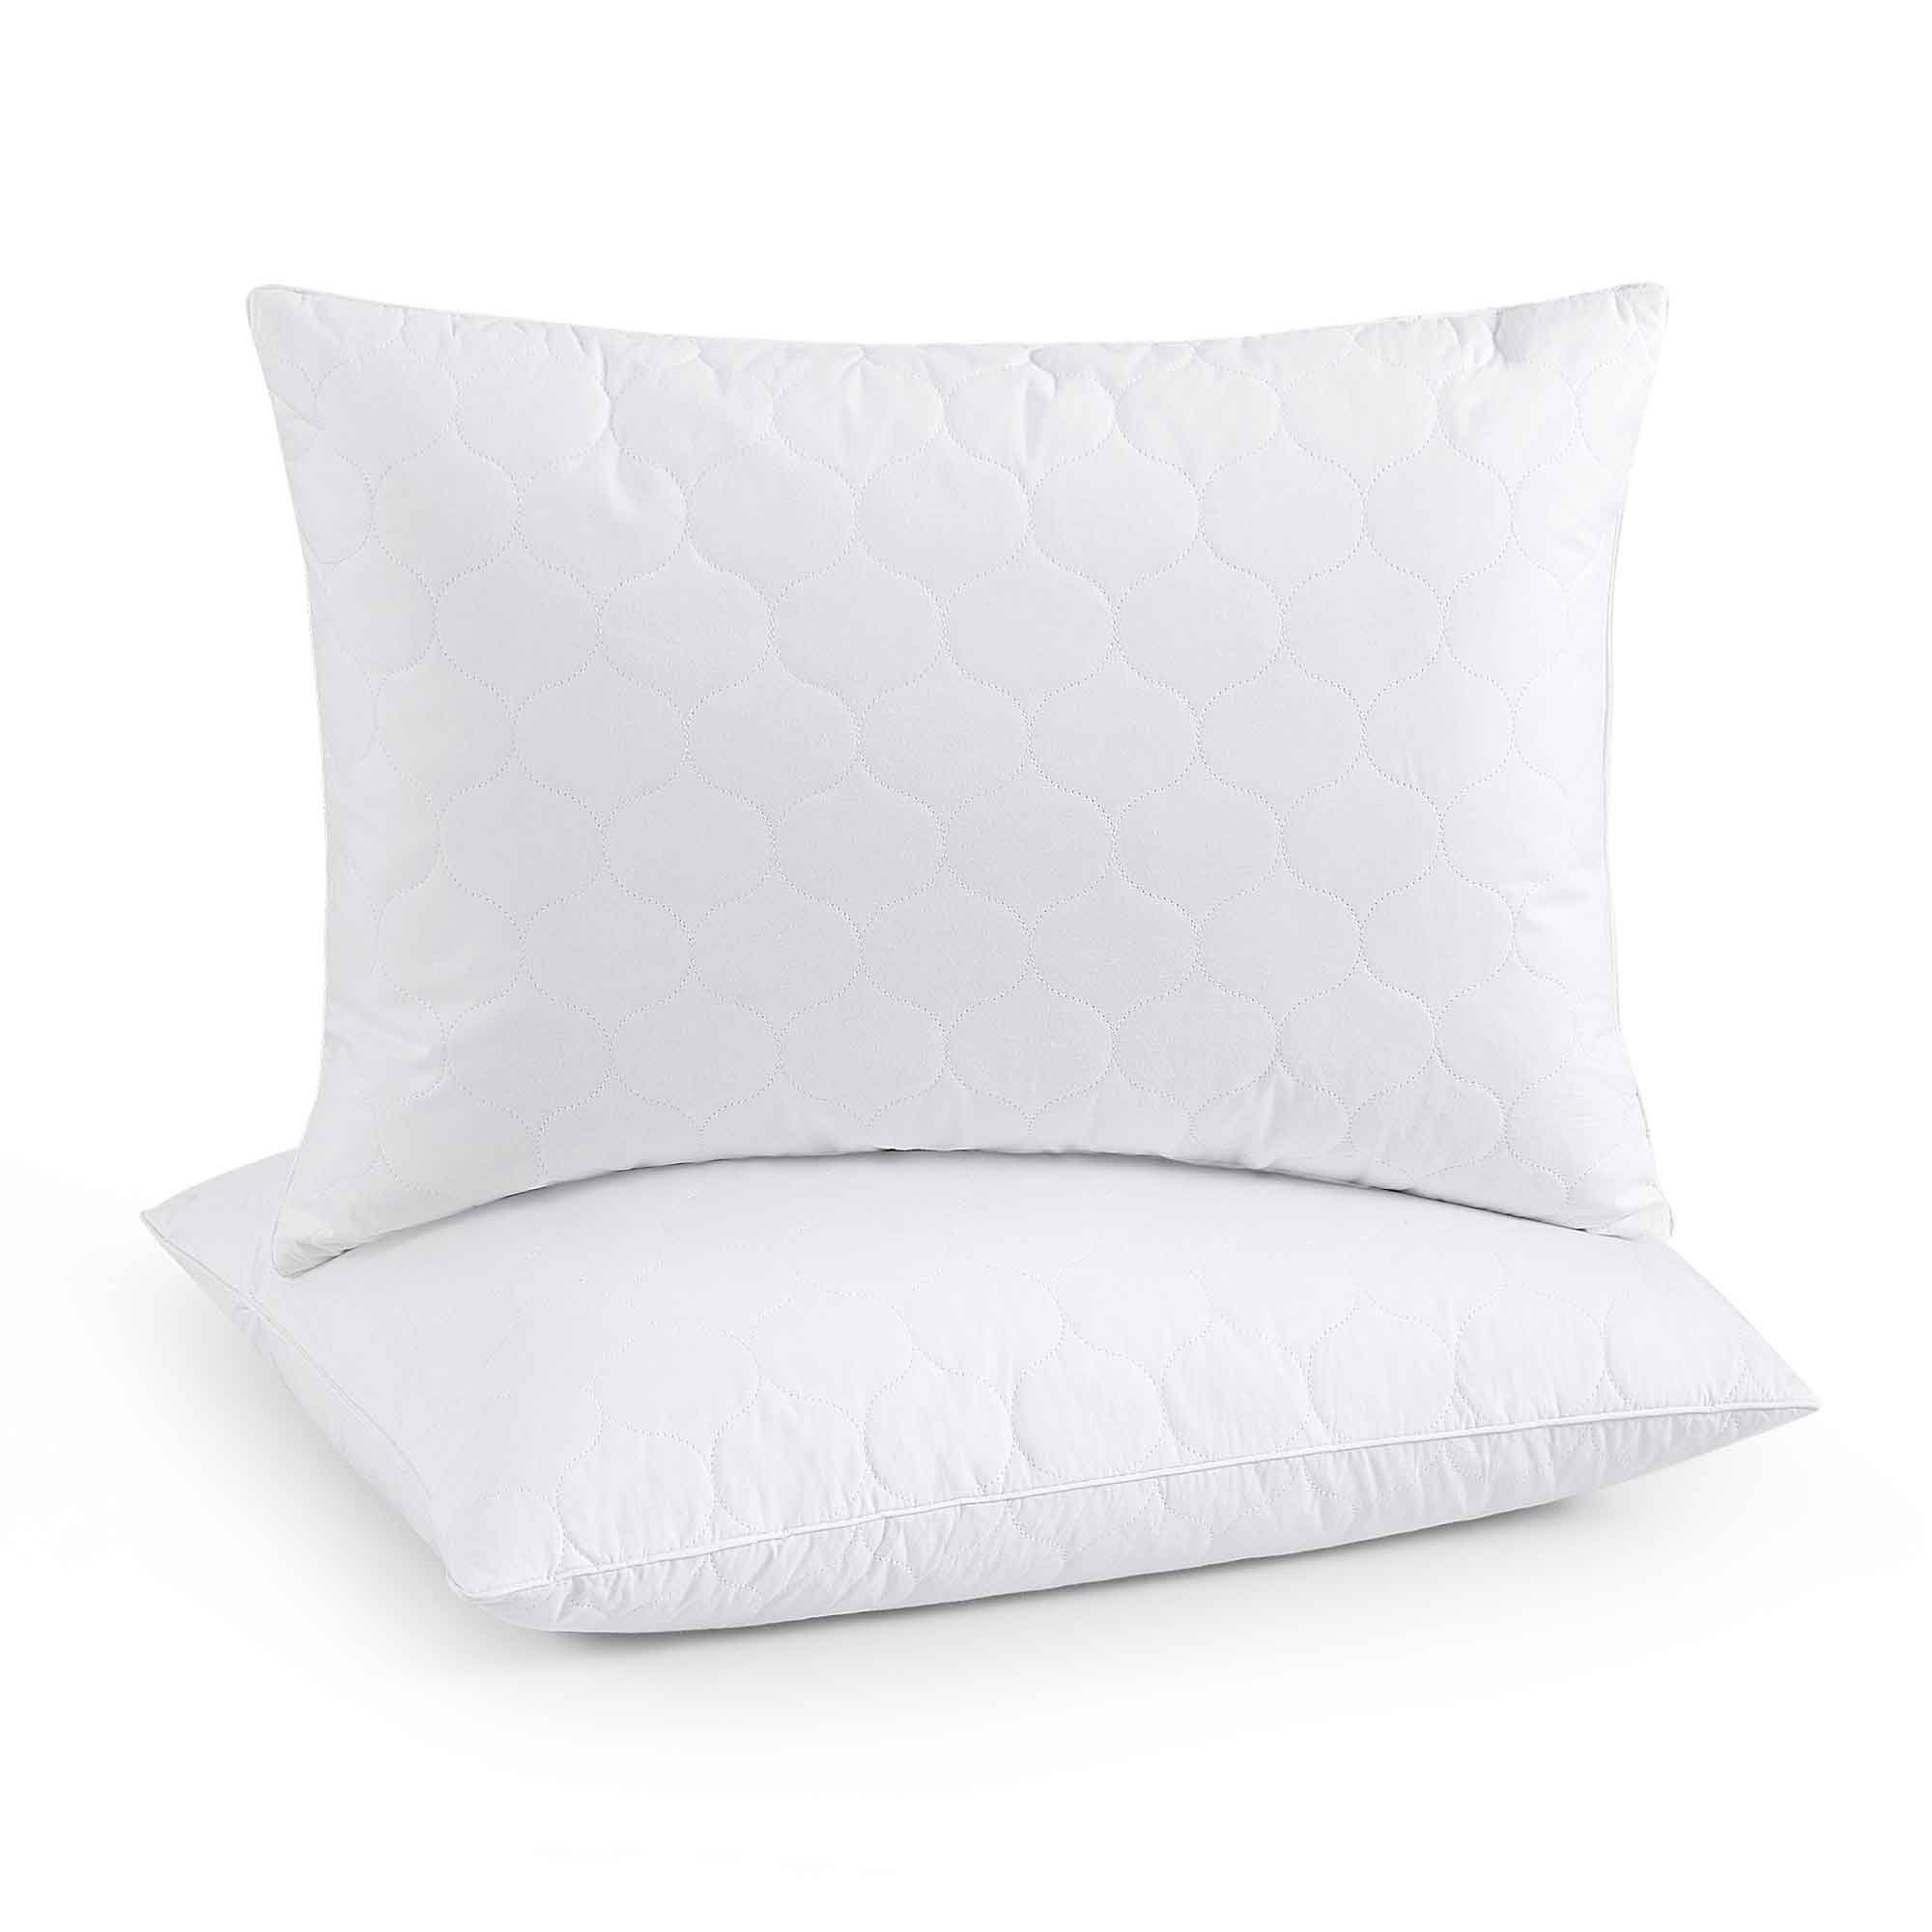 2 Pack Quilted Goose Feather And Down Pillow, Breathable Cotton Cover, Medium Support - King